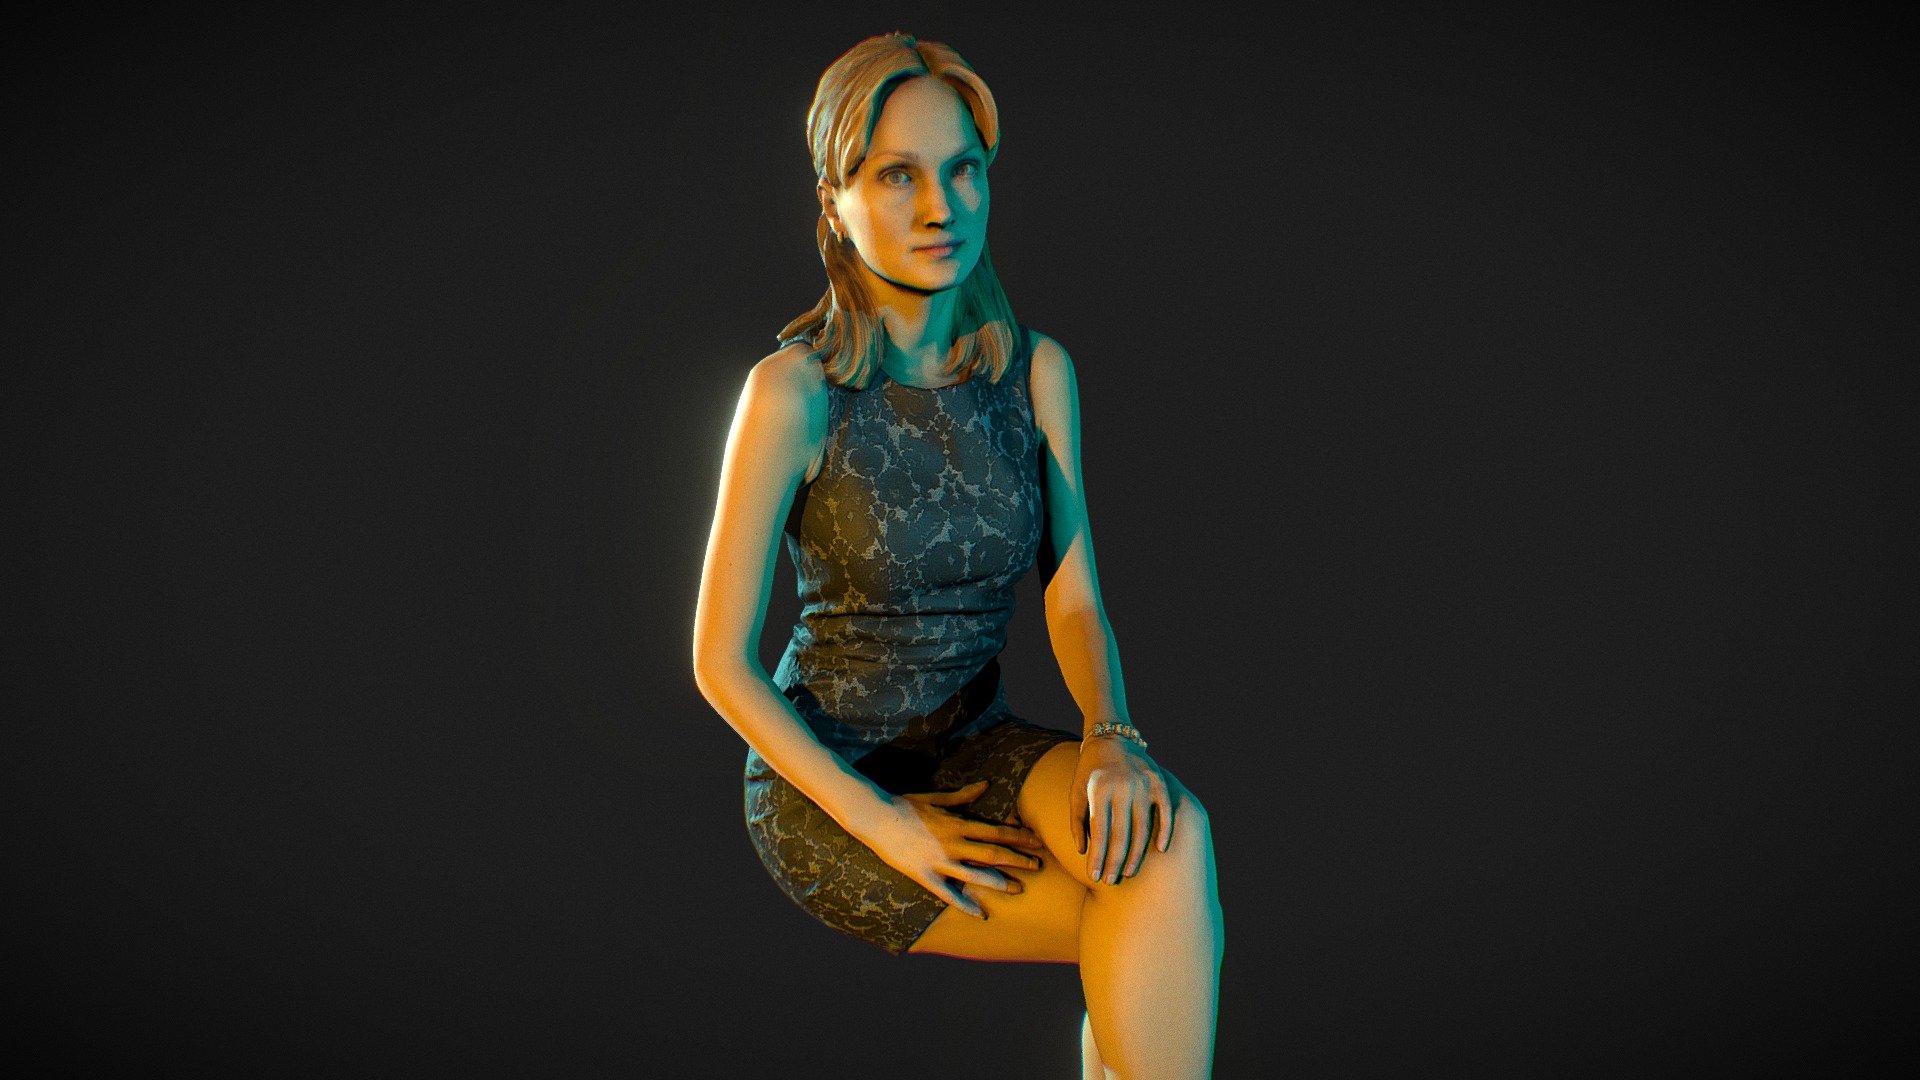 Model was provided.
I just modified the lighting for Sketchfab 3d model